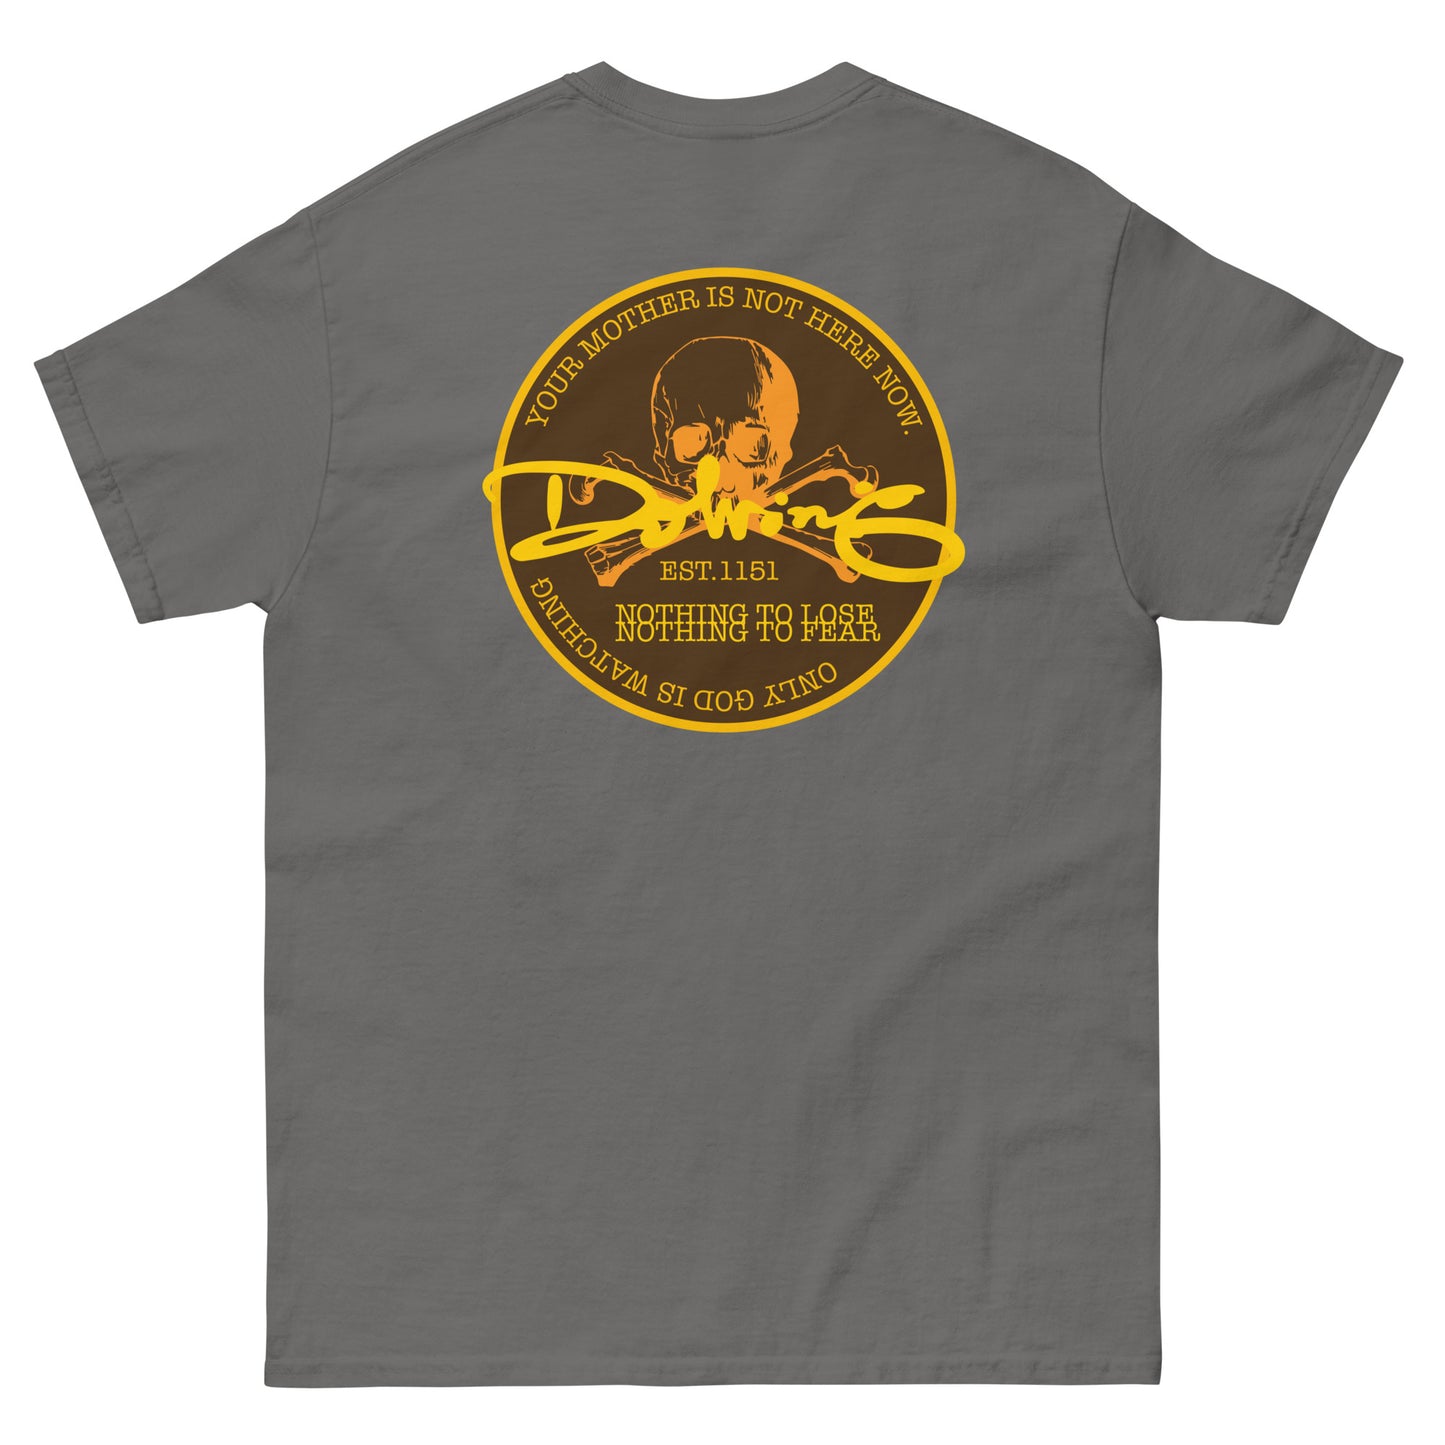 CHICKIN by DOLVING - Men's classic tee